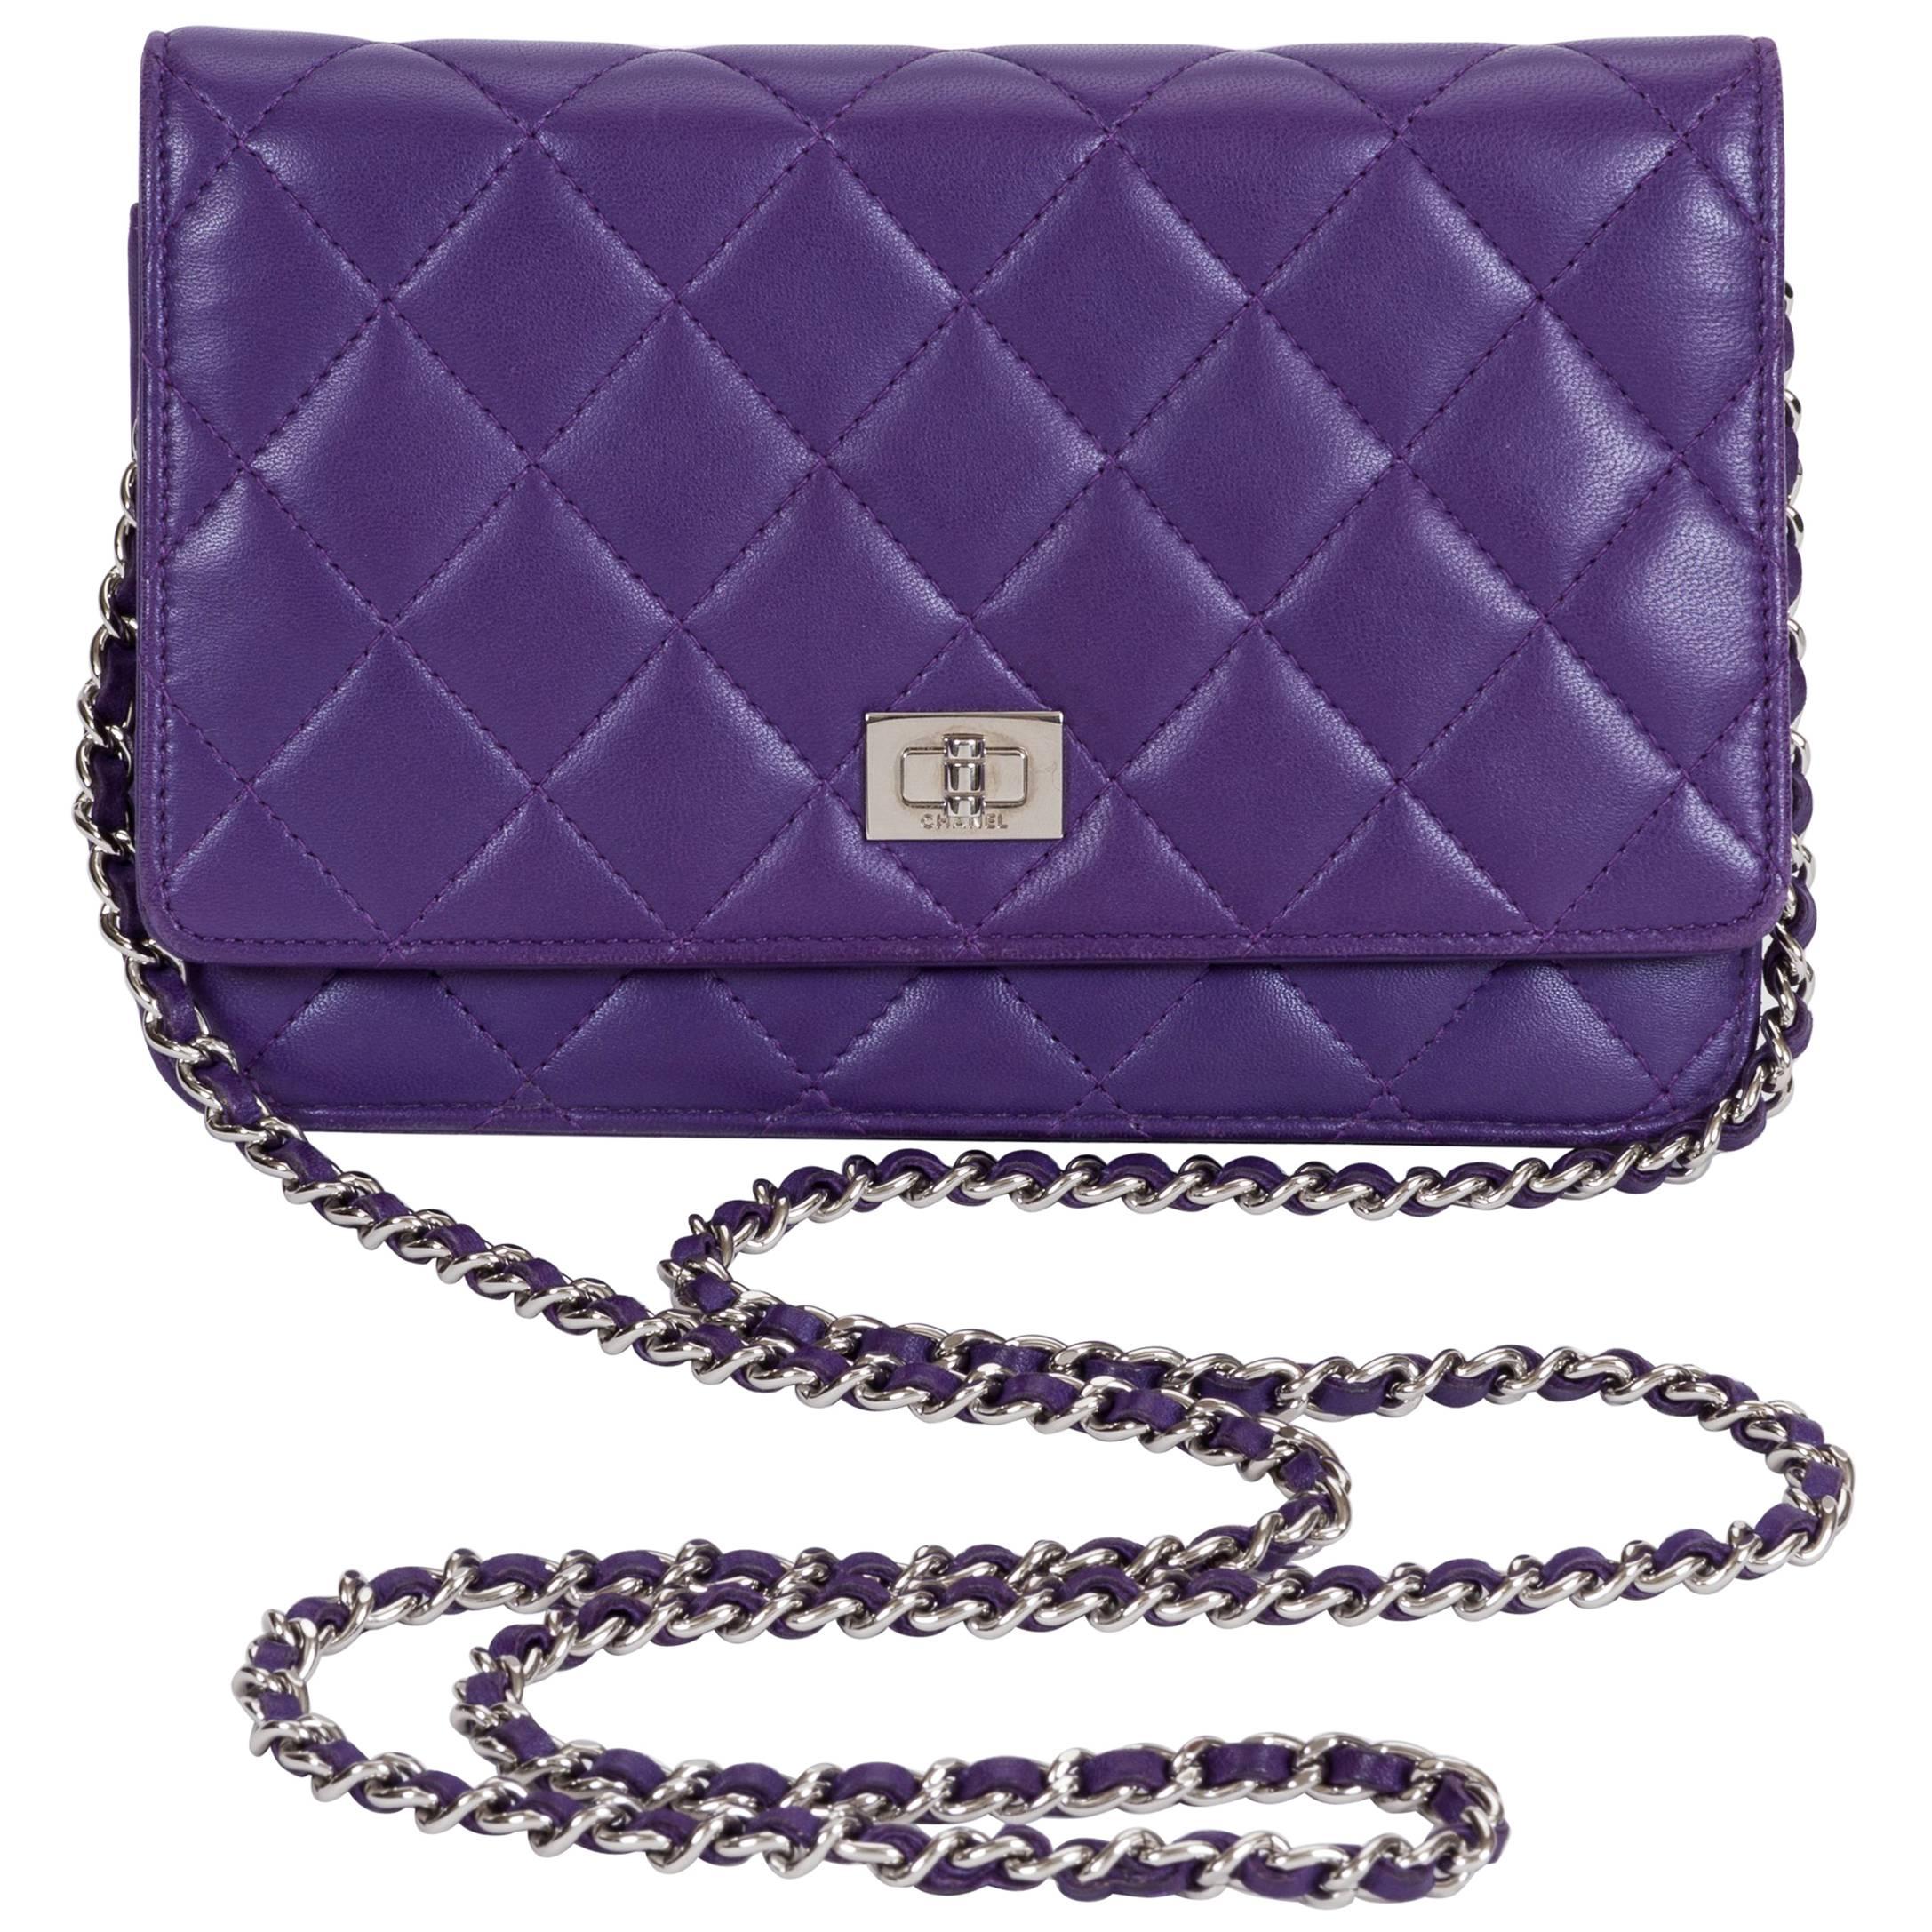 Chanel Reissue Purple Wallet On A Chain Bag